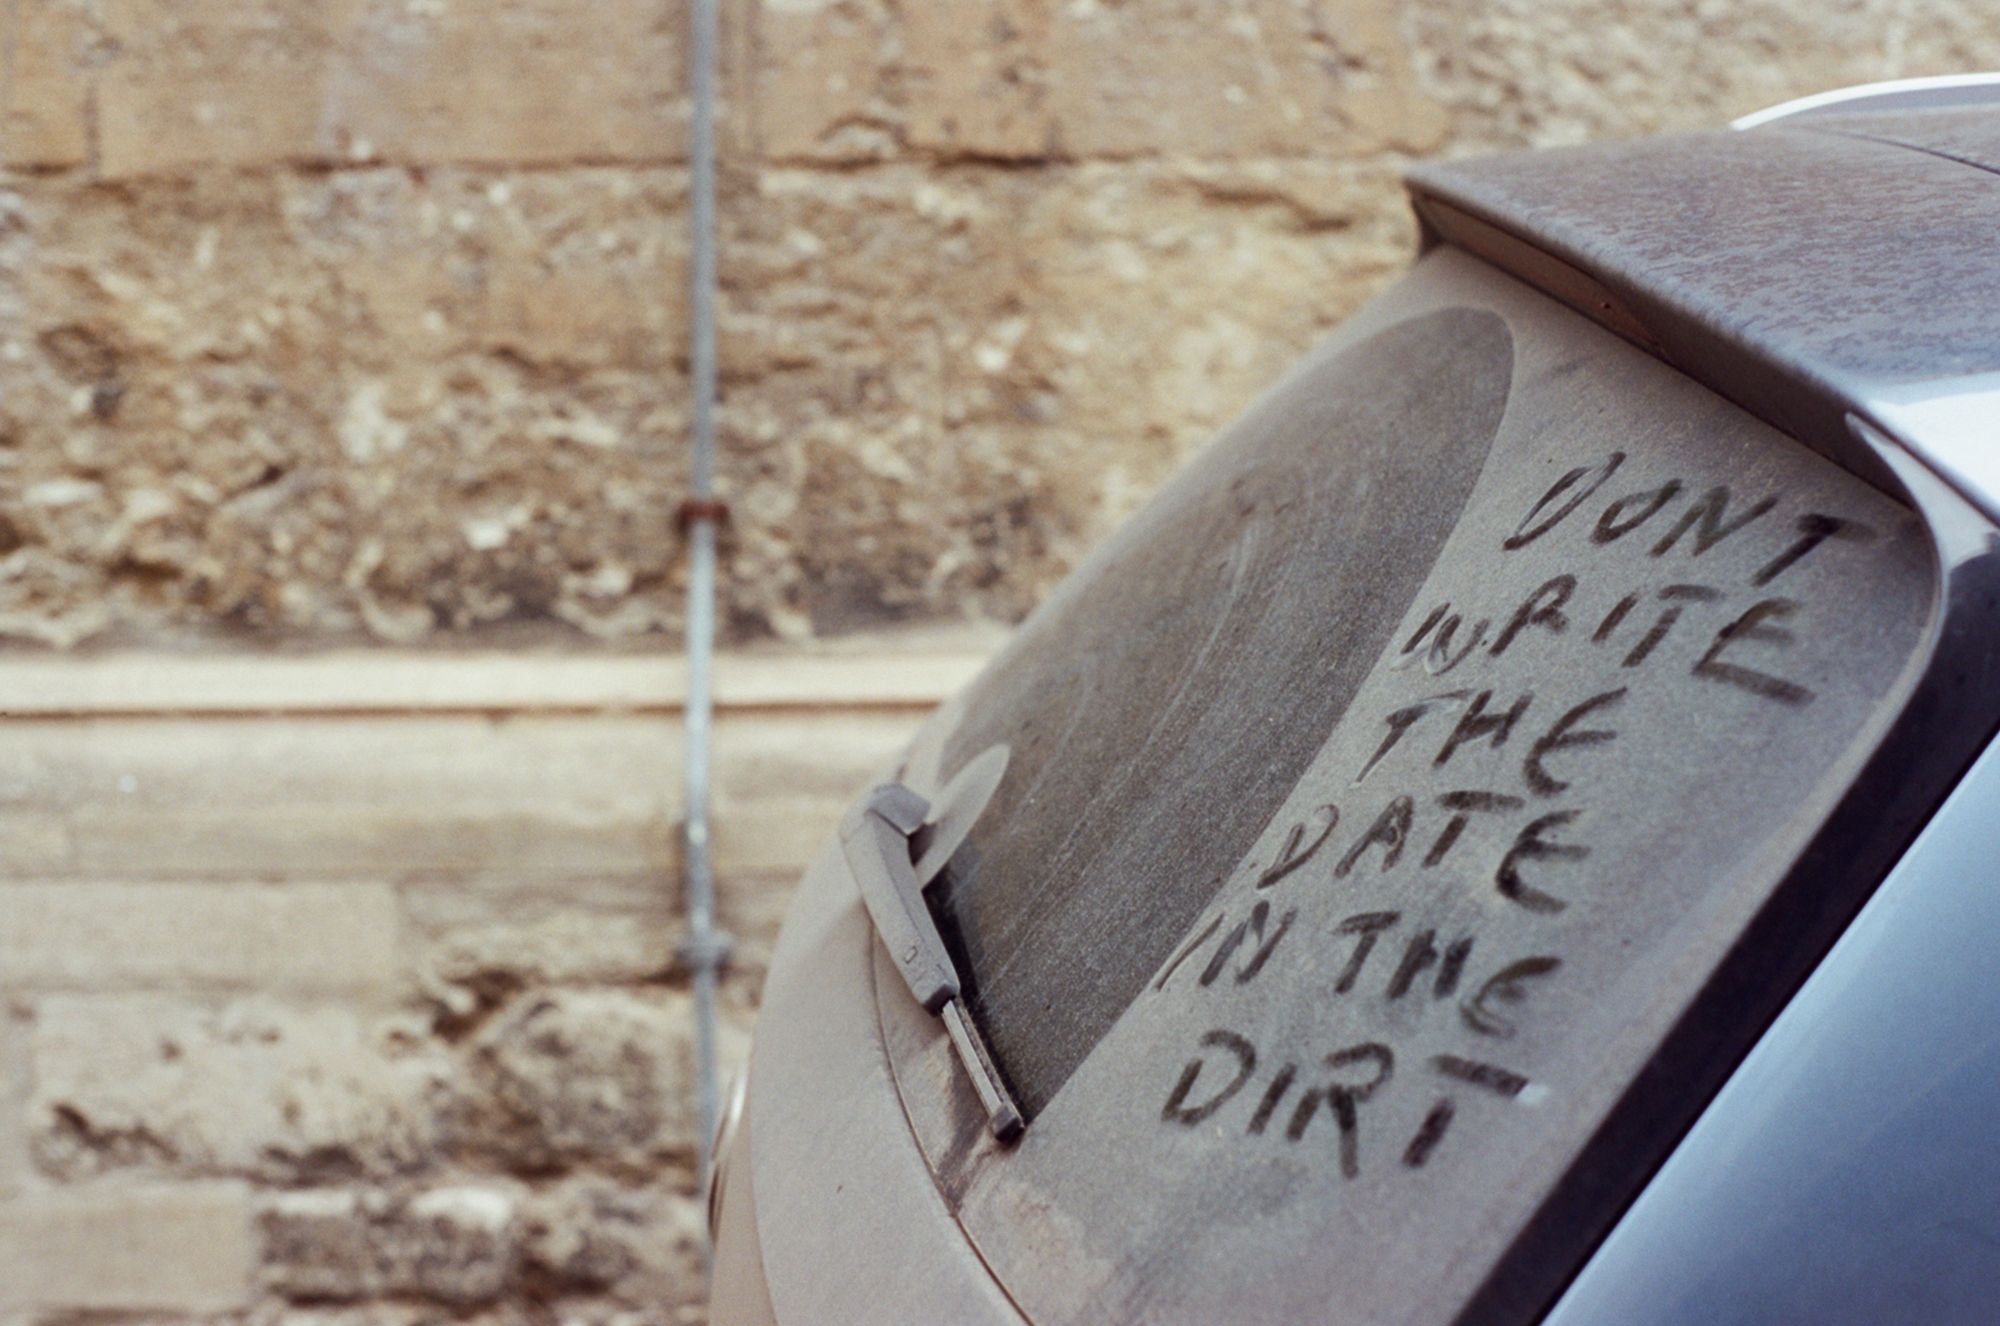 The back of a car window covered in dust, with the words "DONT WRITE THE DATE IN THE DIRT" written in the dirt. Behind it is an old stone-brick wall.